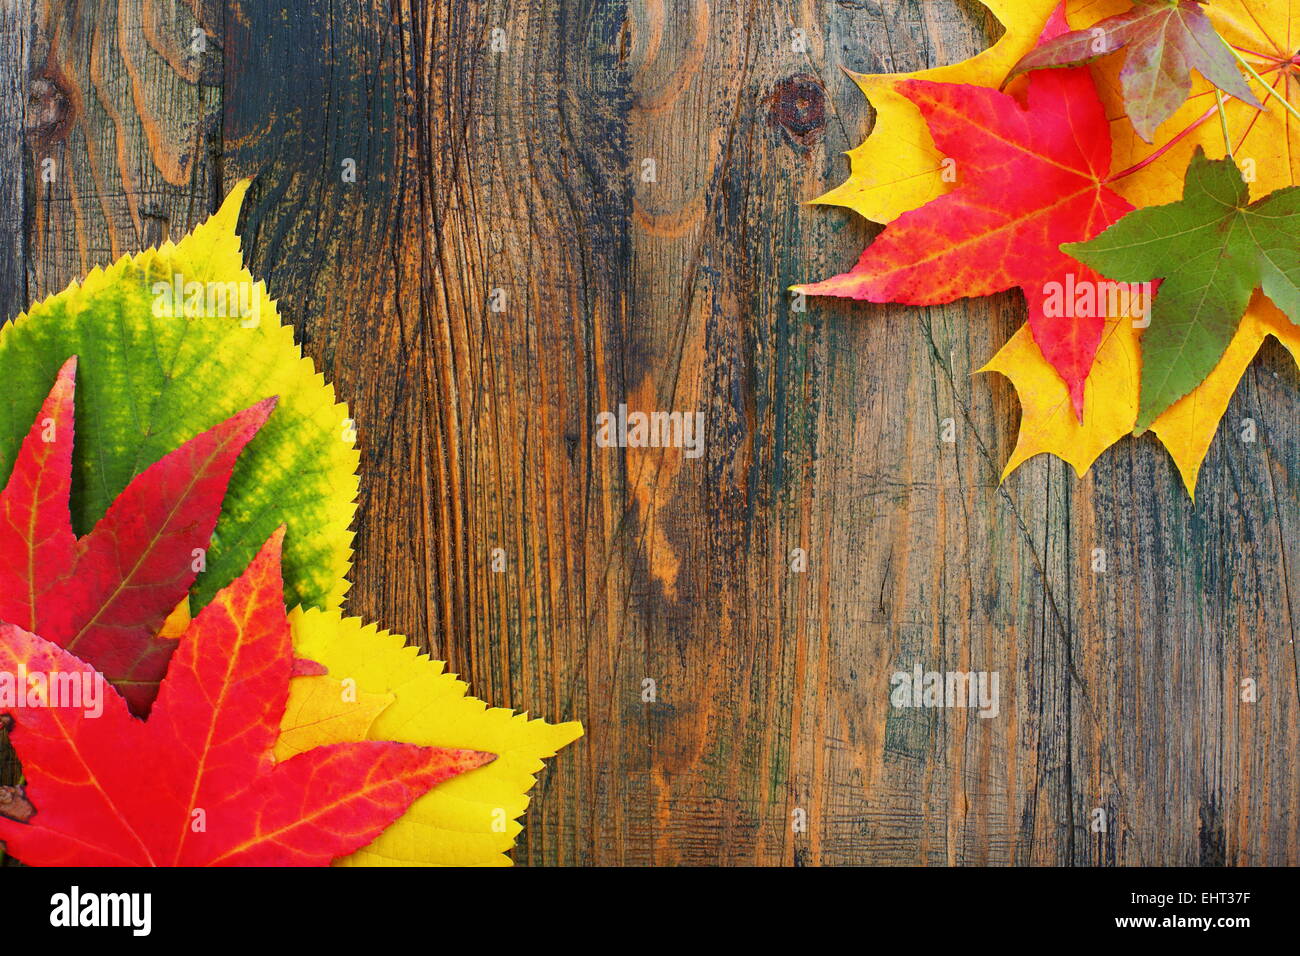 Red, yellow and green leaves. Stock Photo